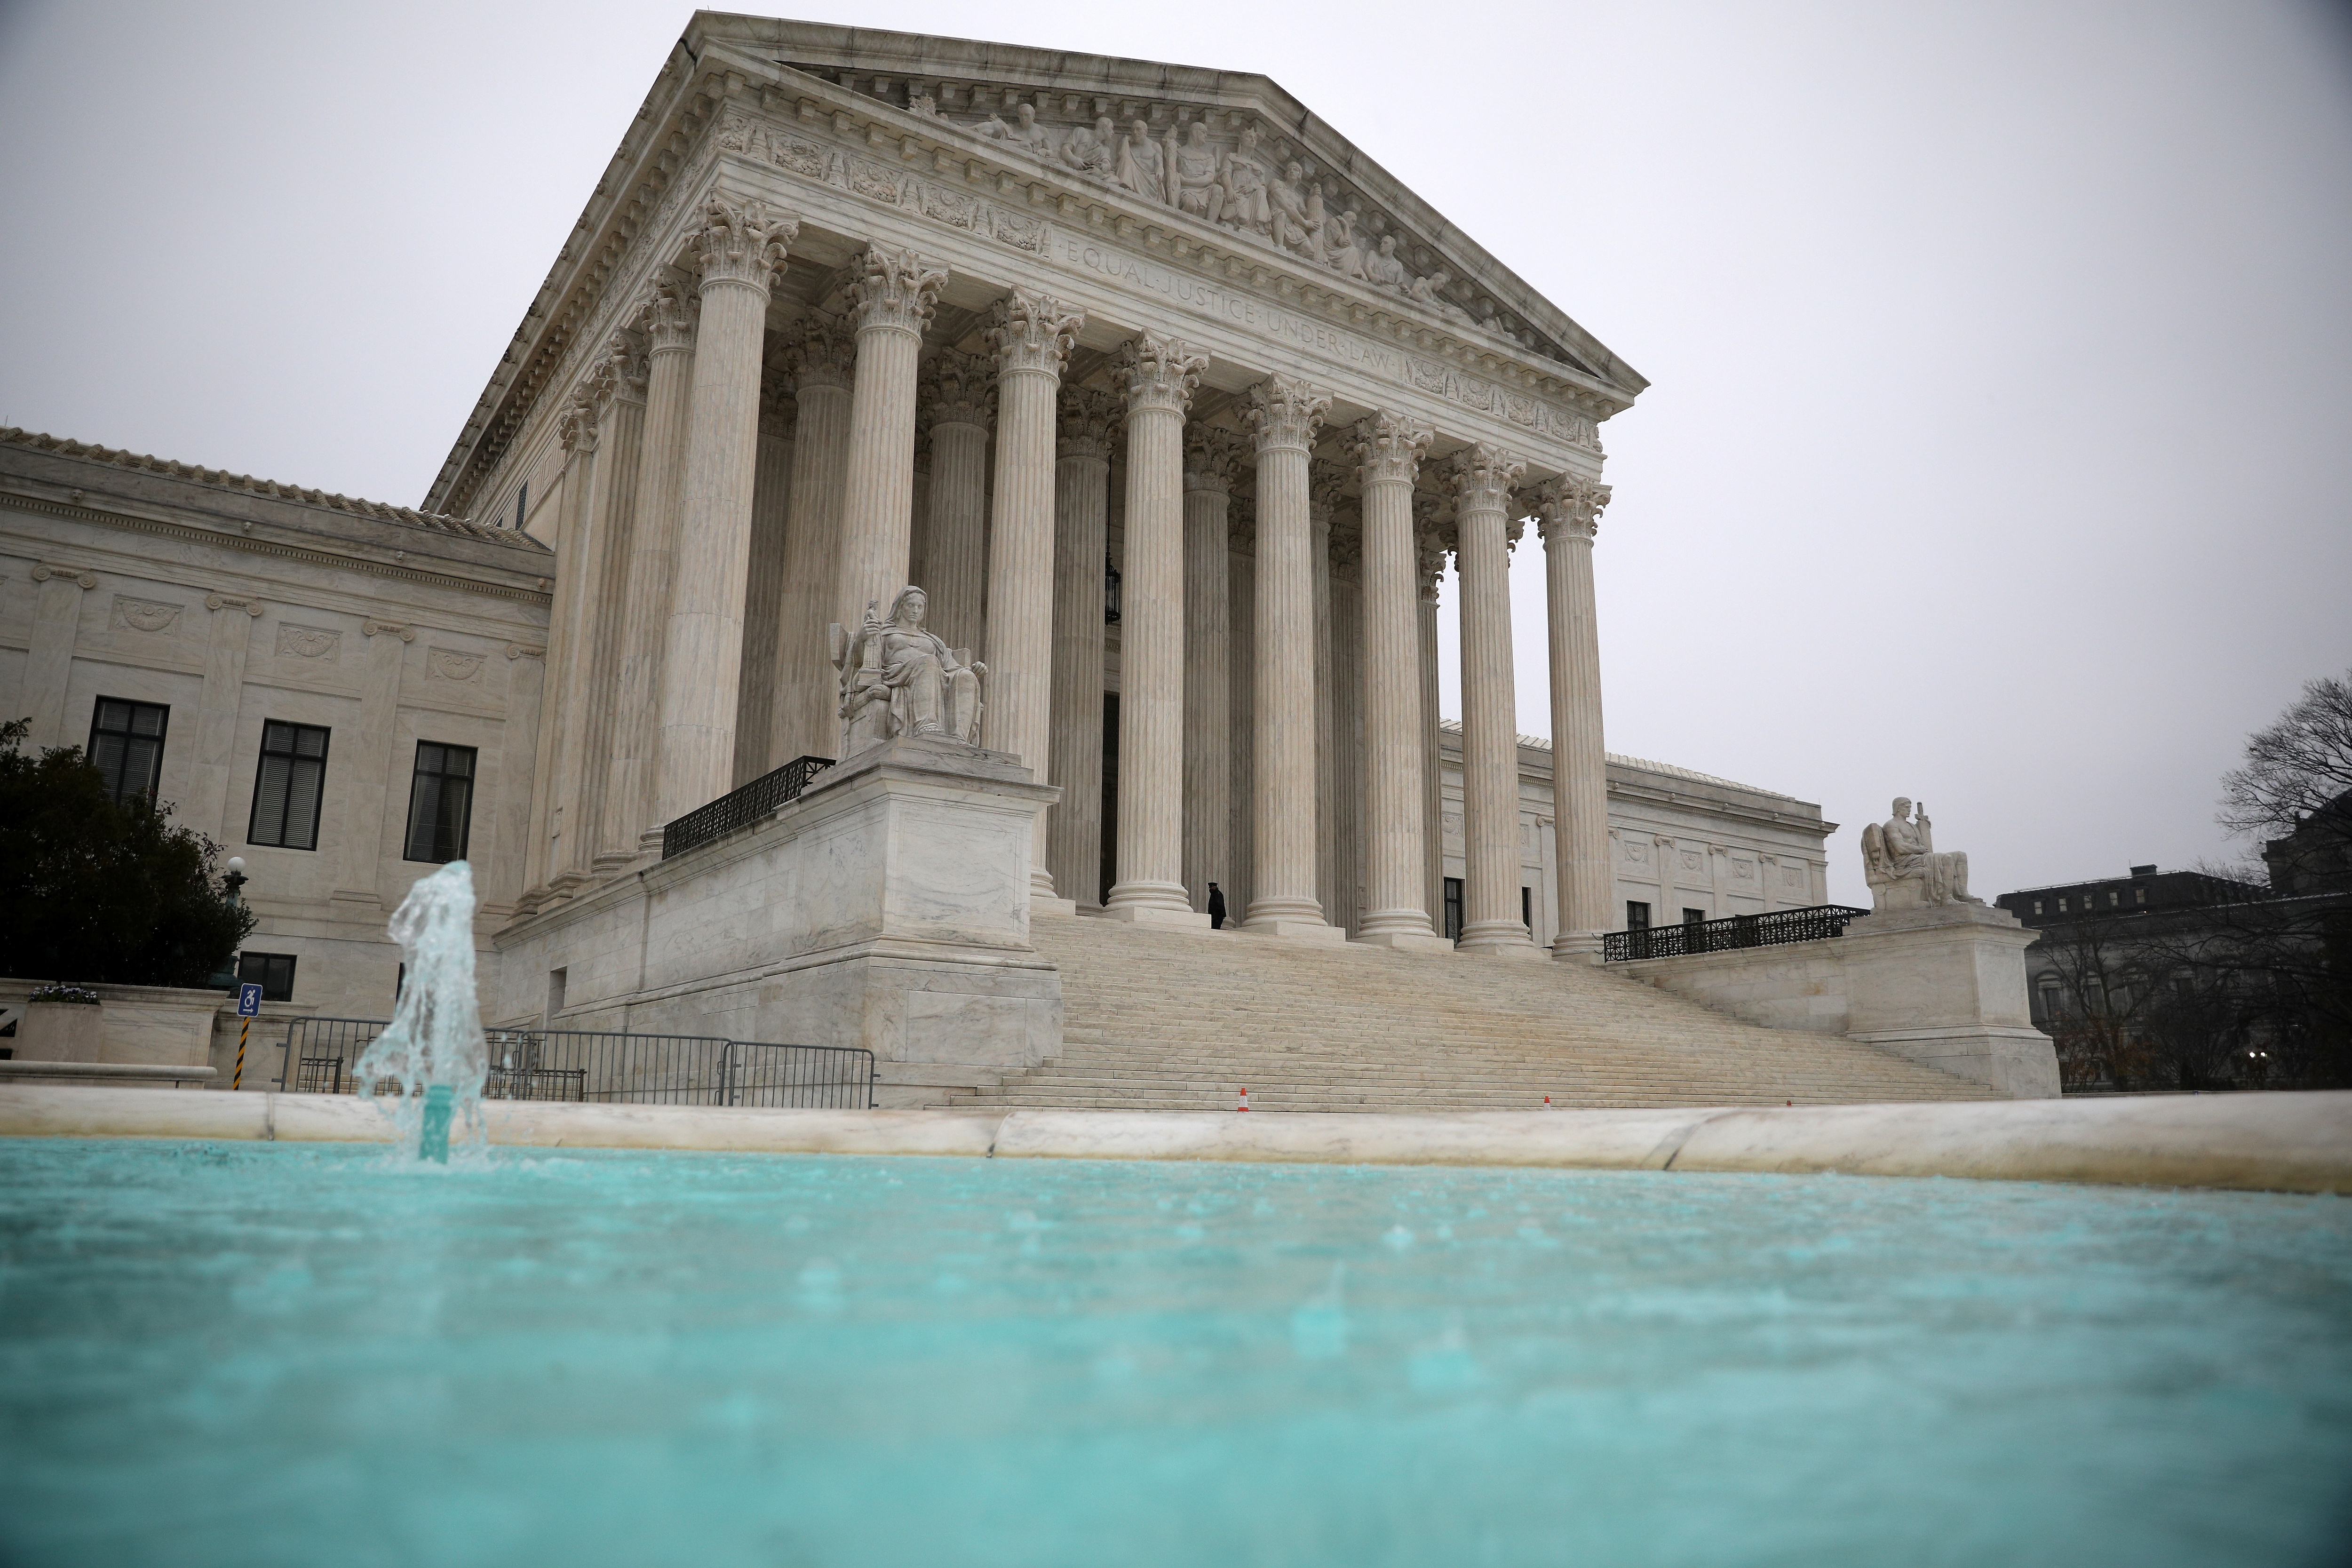 The United States Supreme Court during a rain storm on Capitol Hill in Washington